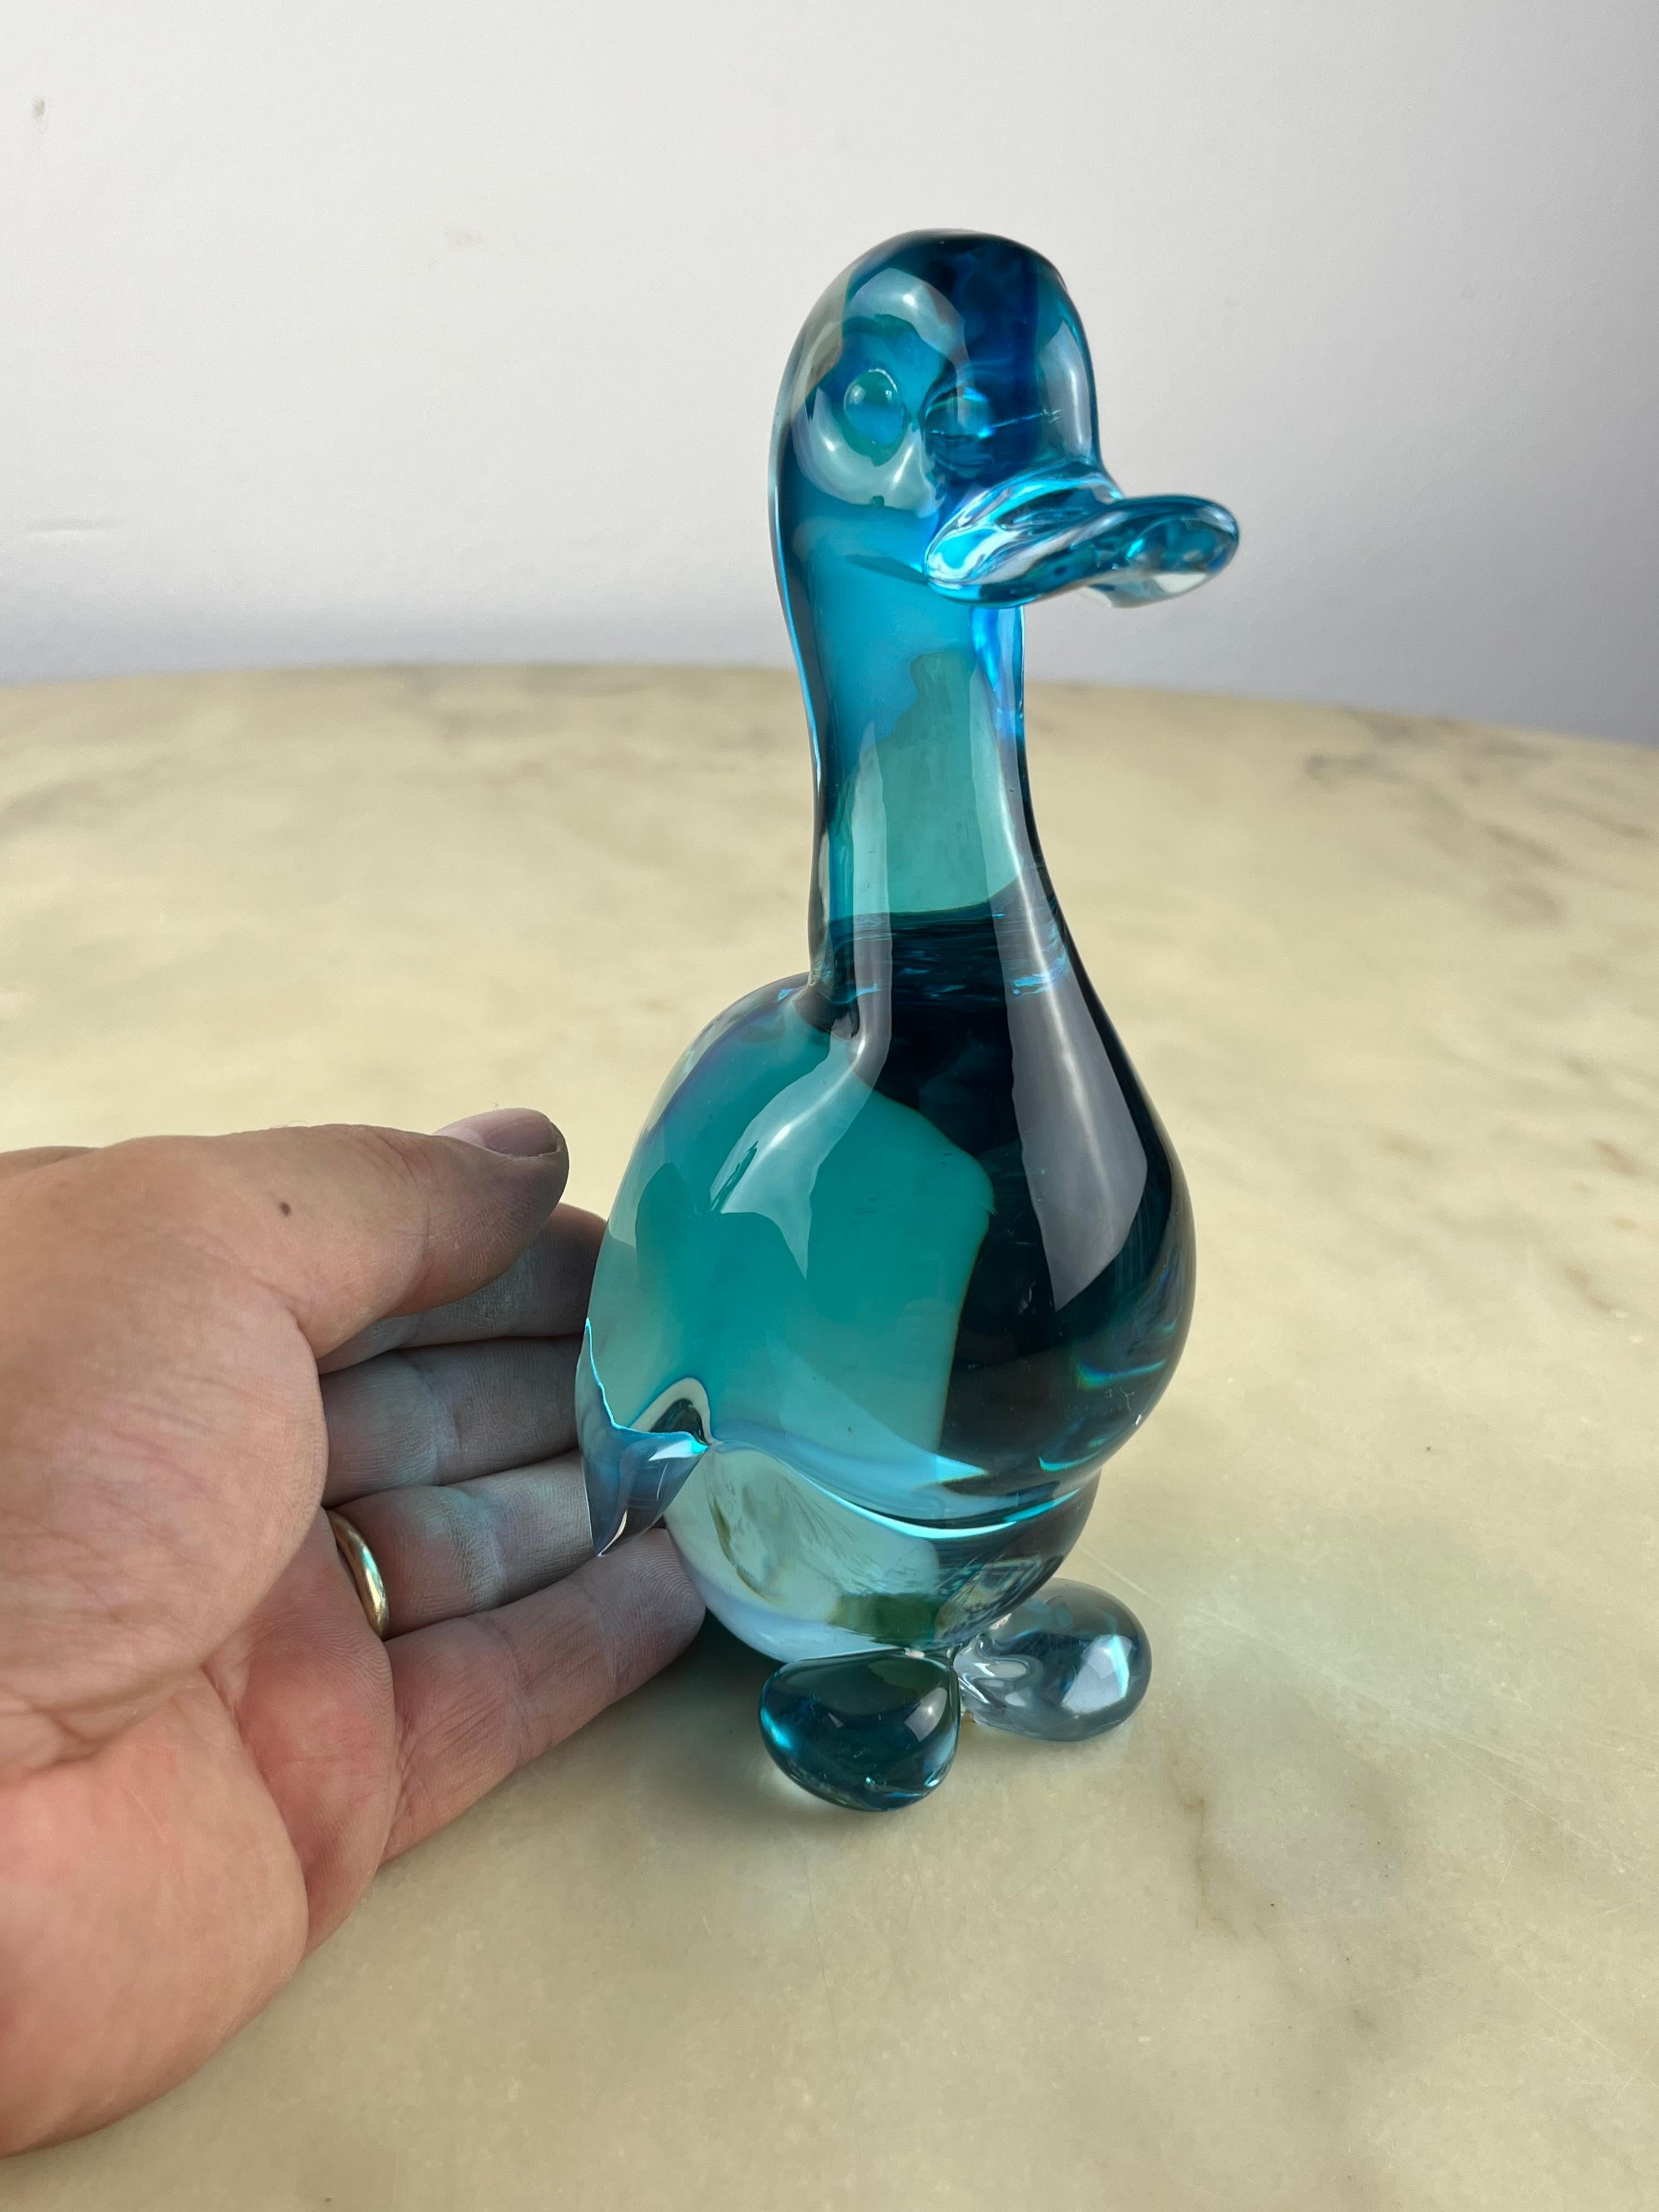 Large Murano glass goose, Italy, 1970s
Purchased by my grandparents in one of the most important gift shops in my city in the 70s, Bart. No breakage.